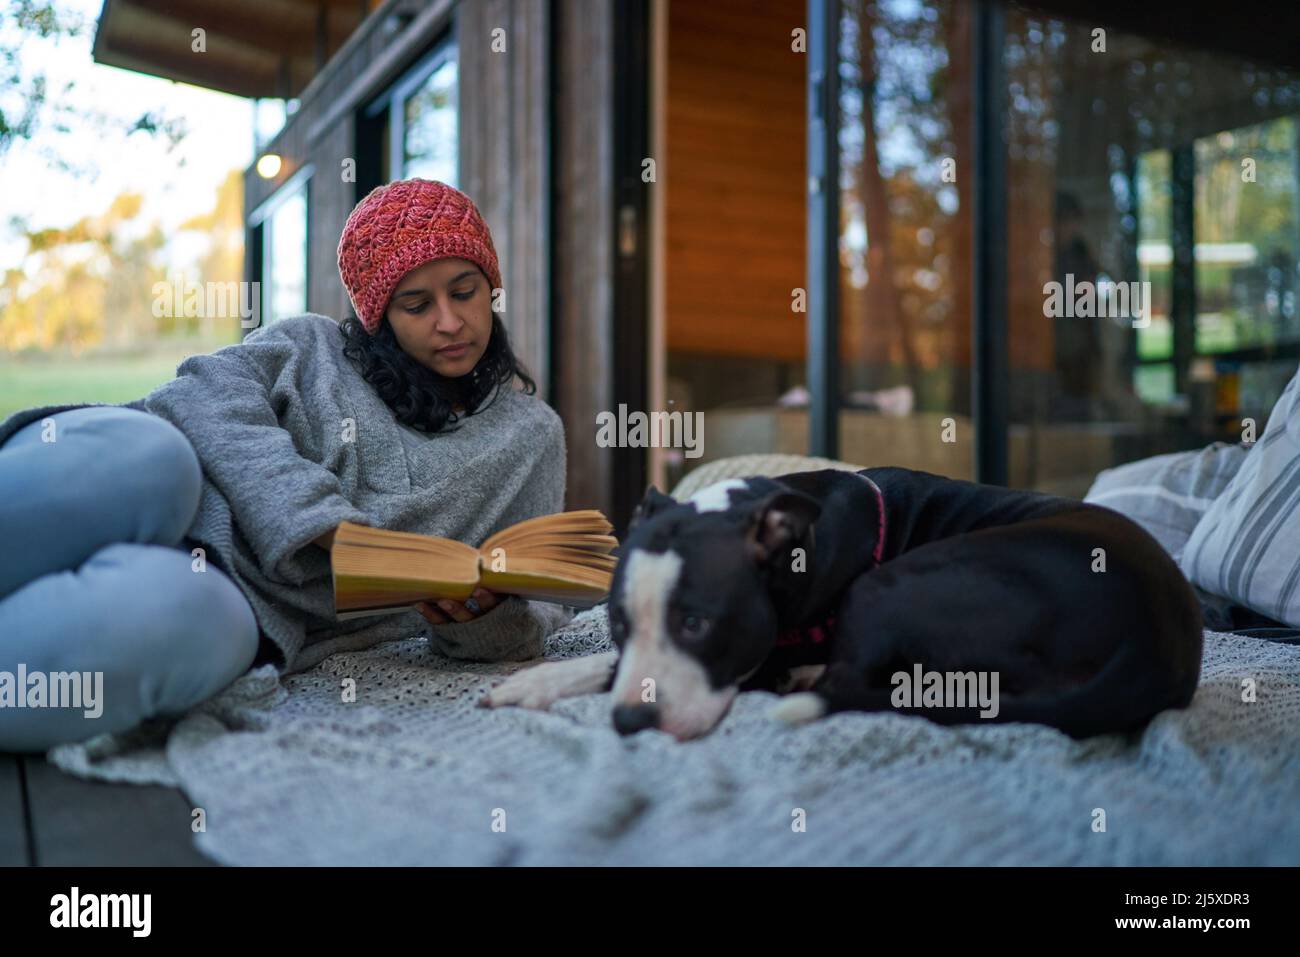 Woman reading book next to dog on cabin patio Stock Photo